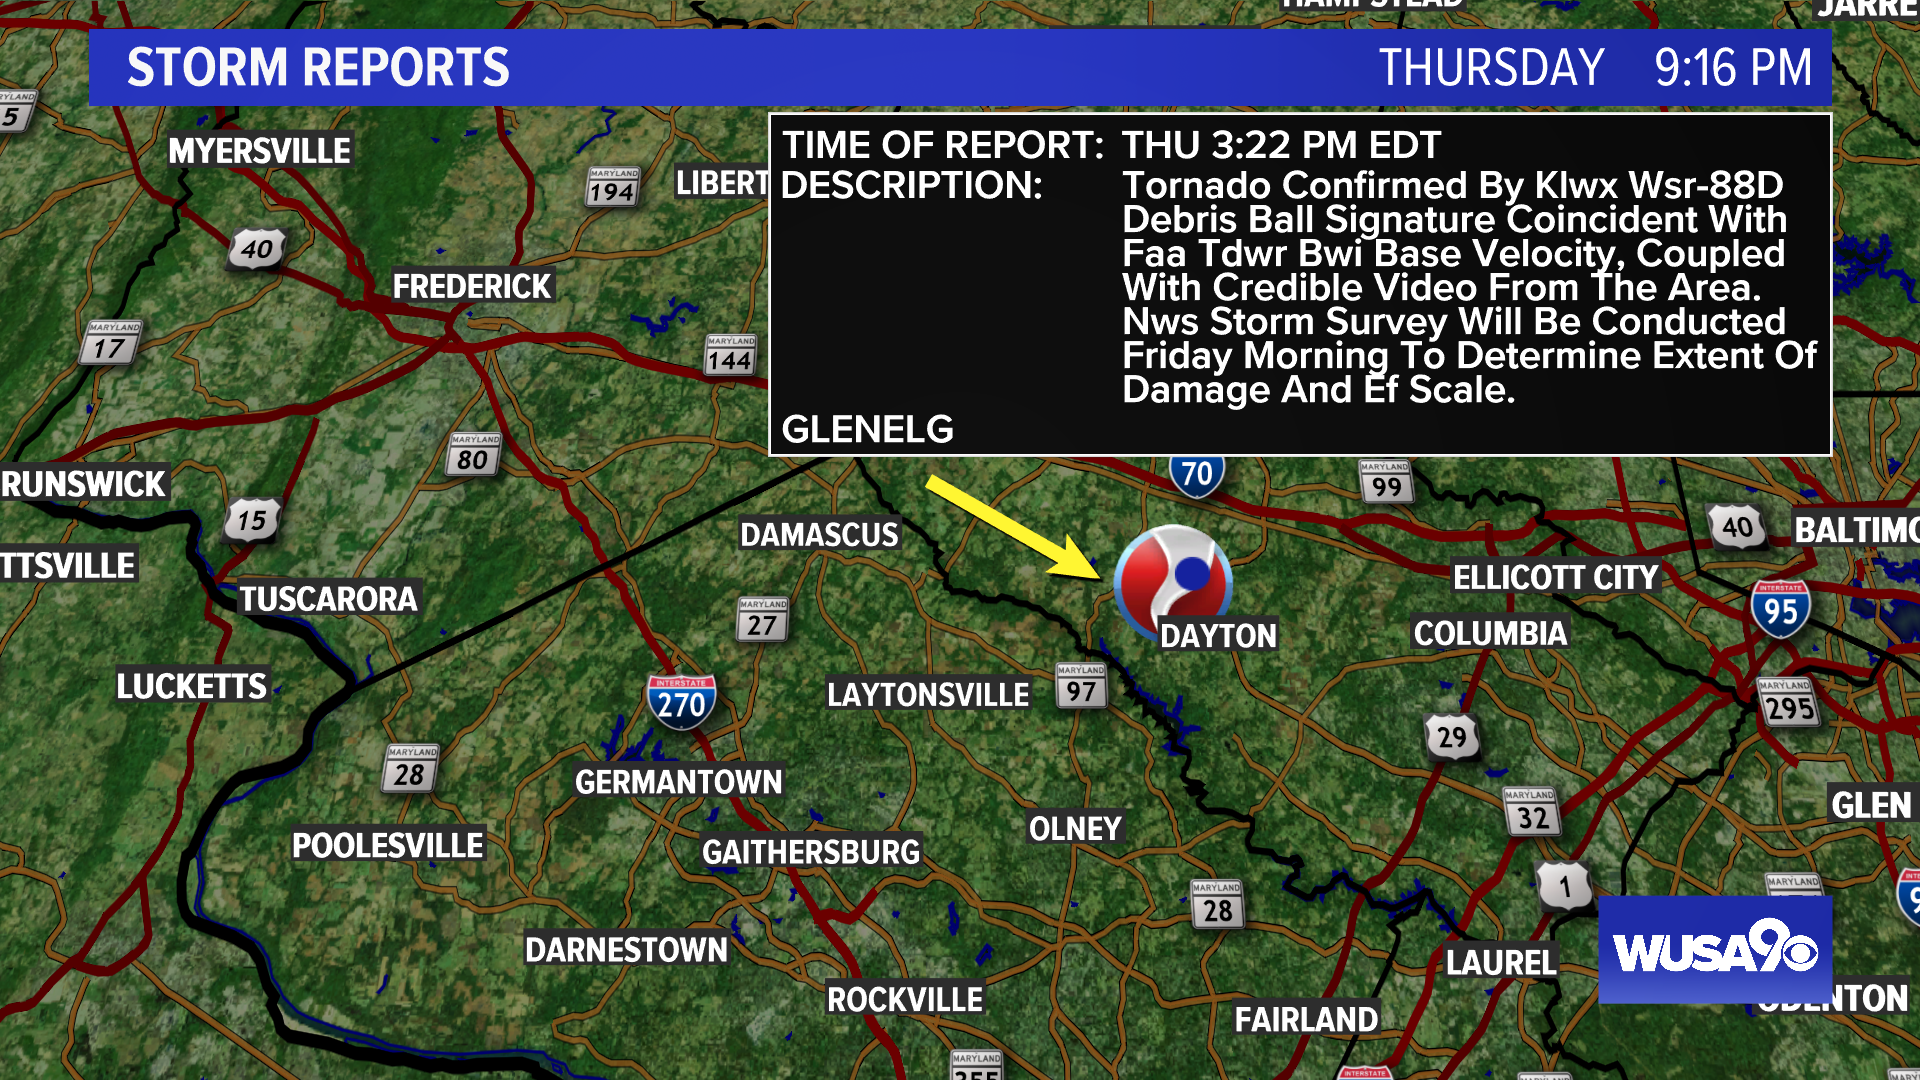 Preliminary reports show a tornado touched down in Glenelg, Md. on Thursday afternoon.